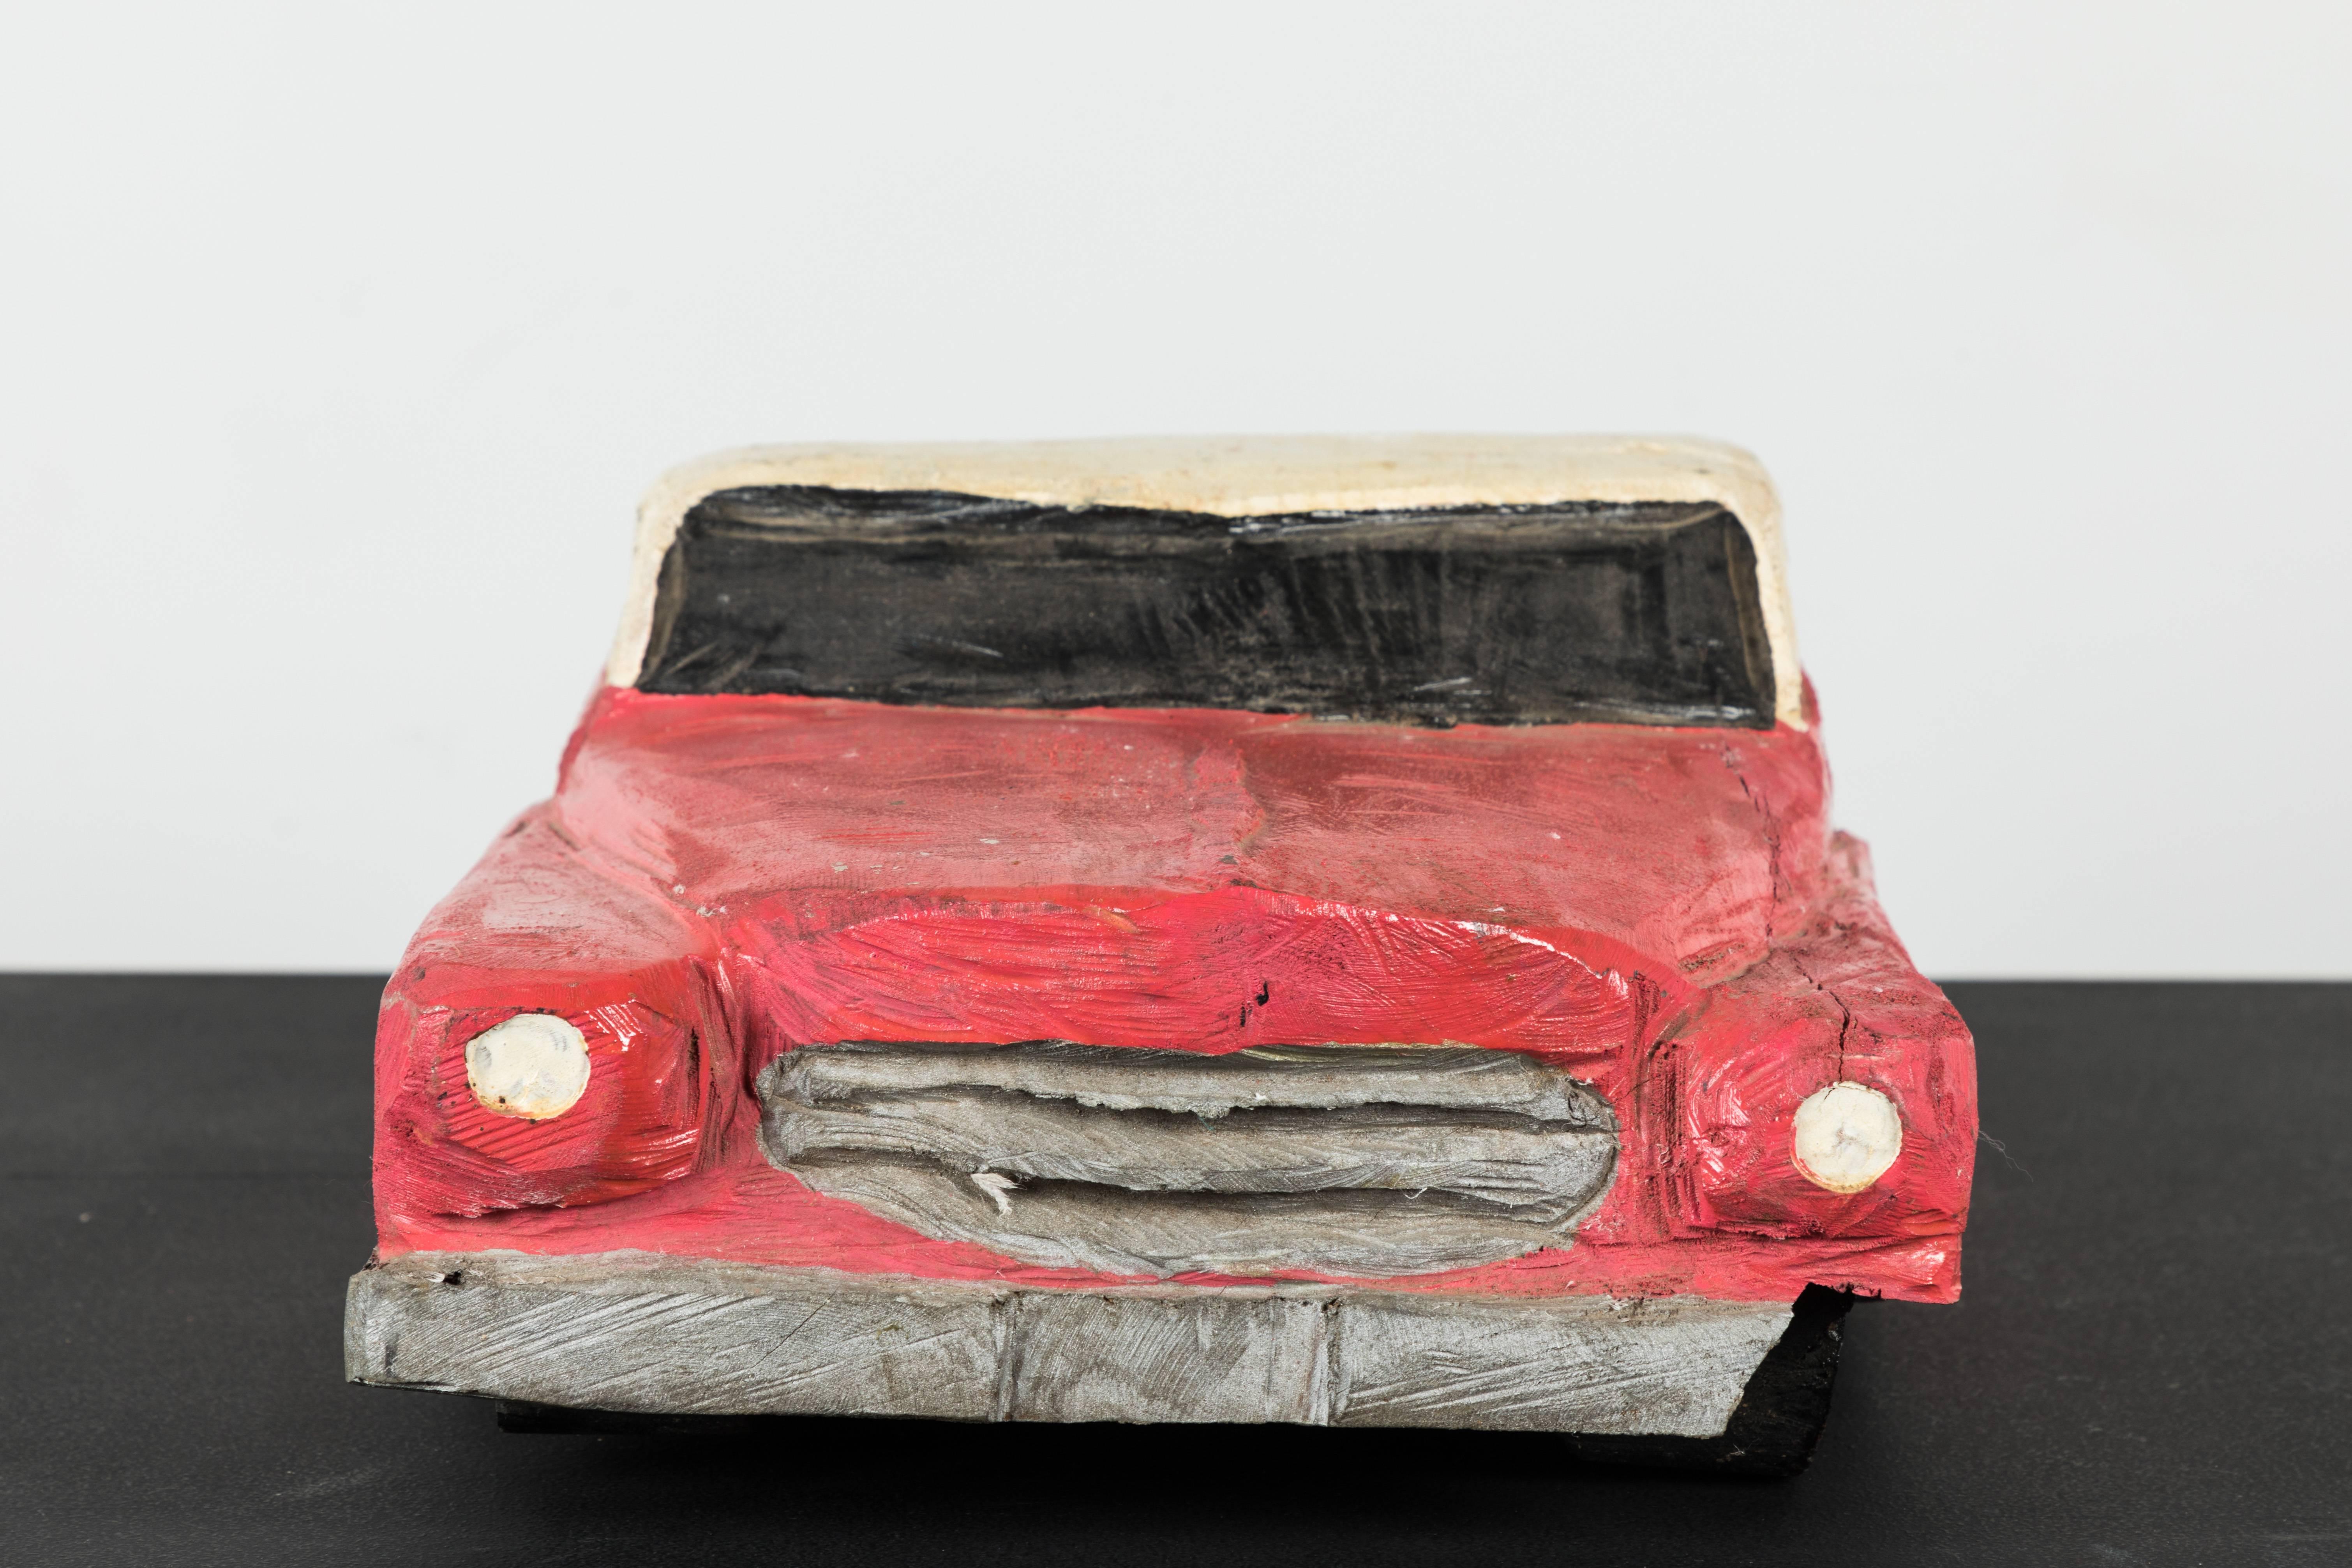 Hand-carved Folk Art pink and white midcentury car. Fun display piece. Quite a heavy piece.